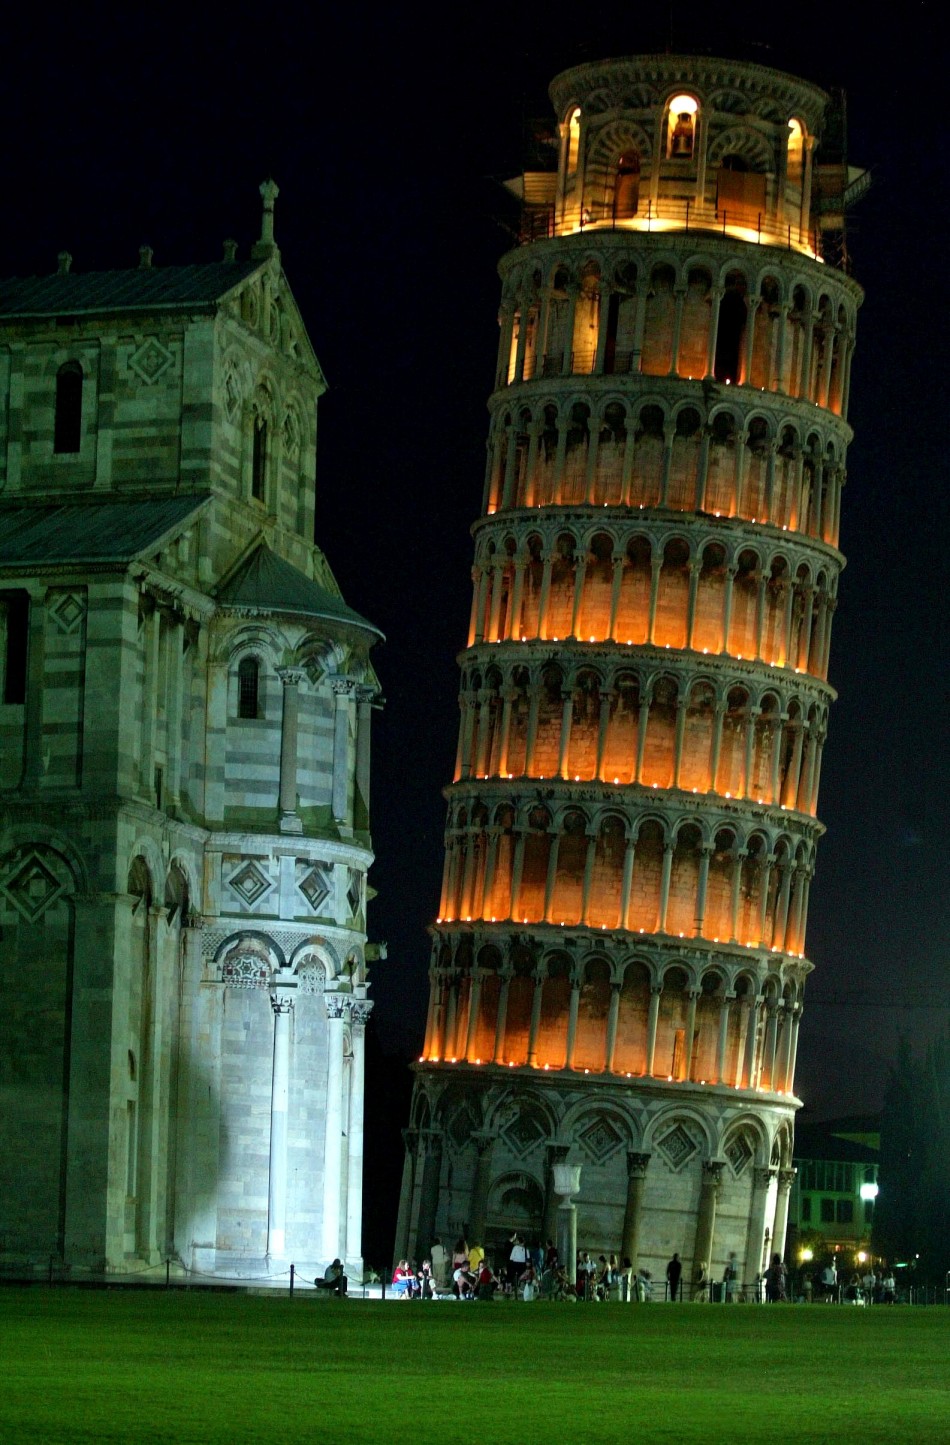 Mafia Plotted to Blow Up Leaning Tower of Pisa